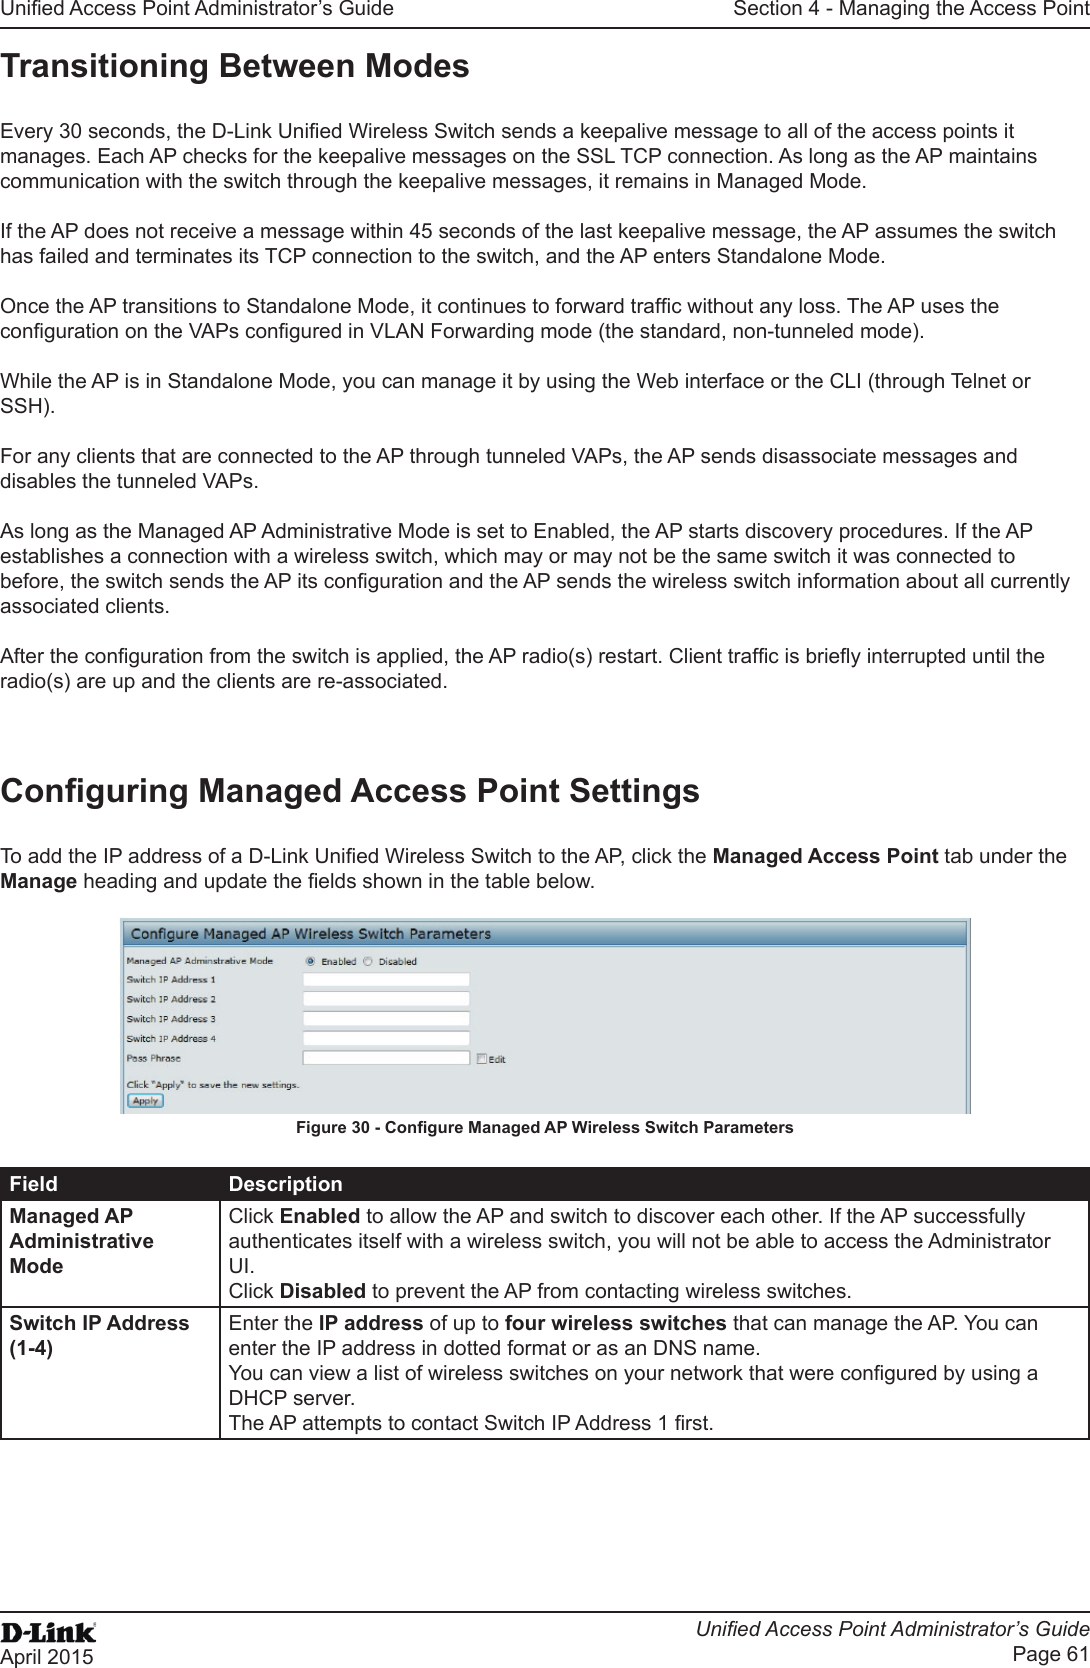 Unied Access Point Administrator’s GuideUnied Access Point Administrator’s GuidePage 61April 2015Section 4 - Managing the Access PointTransitioning Between ModesEvery 30 seconds, the D-Link Unied Wireless Switch sends a keepalive message to all of the access points it manages. Each AP checks for the keepalive messages on the SSL TCP connection. As long as the AP maintains communication with the switch through the keepalive messages, it remains in Managed Mode.If the AP does not receive a message within 45 seconds of the last keepalive message, the AP assumes the switch has failed and terminates its TCP connection to the switch, and the AP enters Standalone Mode.Once the AP transitions to Standalone Mode, it continues to forward trafc without any loss. The AP uses the conguration on the VAPs congured in VLAN Forwarding mode (the standard, non-tunneled mode).While the AP is in Standalone Mode, you can manage it by using the Web interface or the CLI (through Telnet or SSH).For any clients that are connected to the AP through tunneled VAPs, the AP sends disassociate messages and disables the tunneled VAPs.As long as the Managed AP Administrative Mode is set to Enabled, the AP starts discovery procedures. If the AP establishes a connection with a wireless switch, which may or may not be the same switch it was connected to before, the switch sends the AP its conguration and the AP sends the wireless switch information about all currently associated clients.After the conguration from the switch is applied, the AP radio(s) restart. Client trafc is briey interrupted until the radio(s) are up and the clients are re-associated.Conguring Managed Access Point SettingsTo add the IP address of a D-Link Unied Wireless Switch to the AP, click the Managed Access Point tab under the Manage heading and update the elds shown in the table below.Figure 30 - Congure Managed AP Wireless Switch ParametersField DescriptionManaged AP Administrative ModeClick Enabled to allow the AP and switch to discover each other. If the AP successfully authenticates itself with a wireless switch, you will not be able to access the Administrator UI. Click Disabled to prevent the AP from contacting wireless switches.Switch IP Address (1-4)Enter the IP address of up to four wireless switches that can manage the AP. You can enter the IP address in dotted format or as an DNS name.You can view a list of wireless switches on your network that were congured by using a DHCP server.The AP attempts to contact Switch IP Address 1 rst.